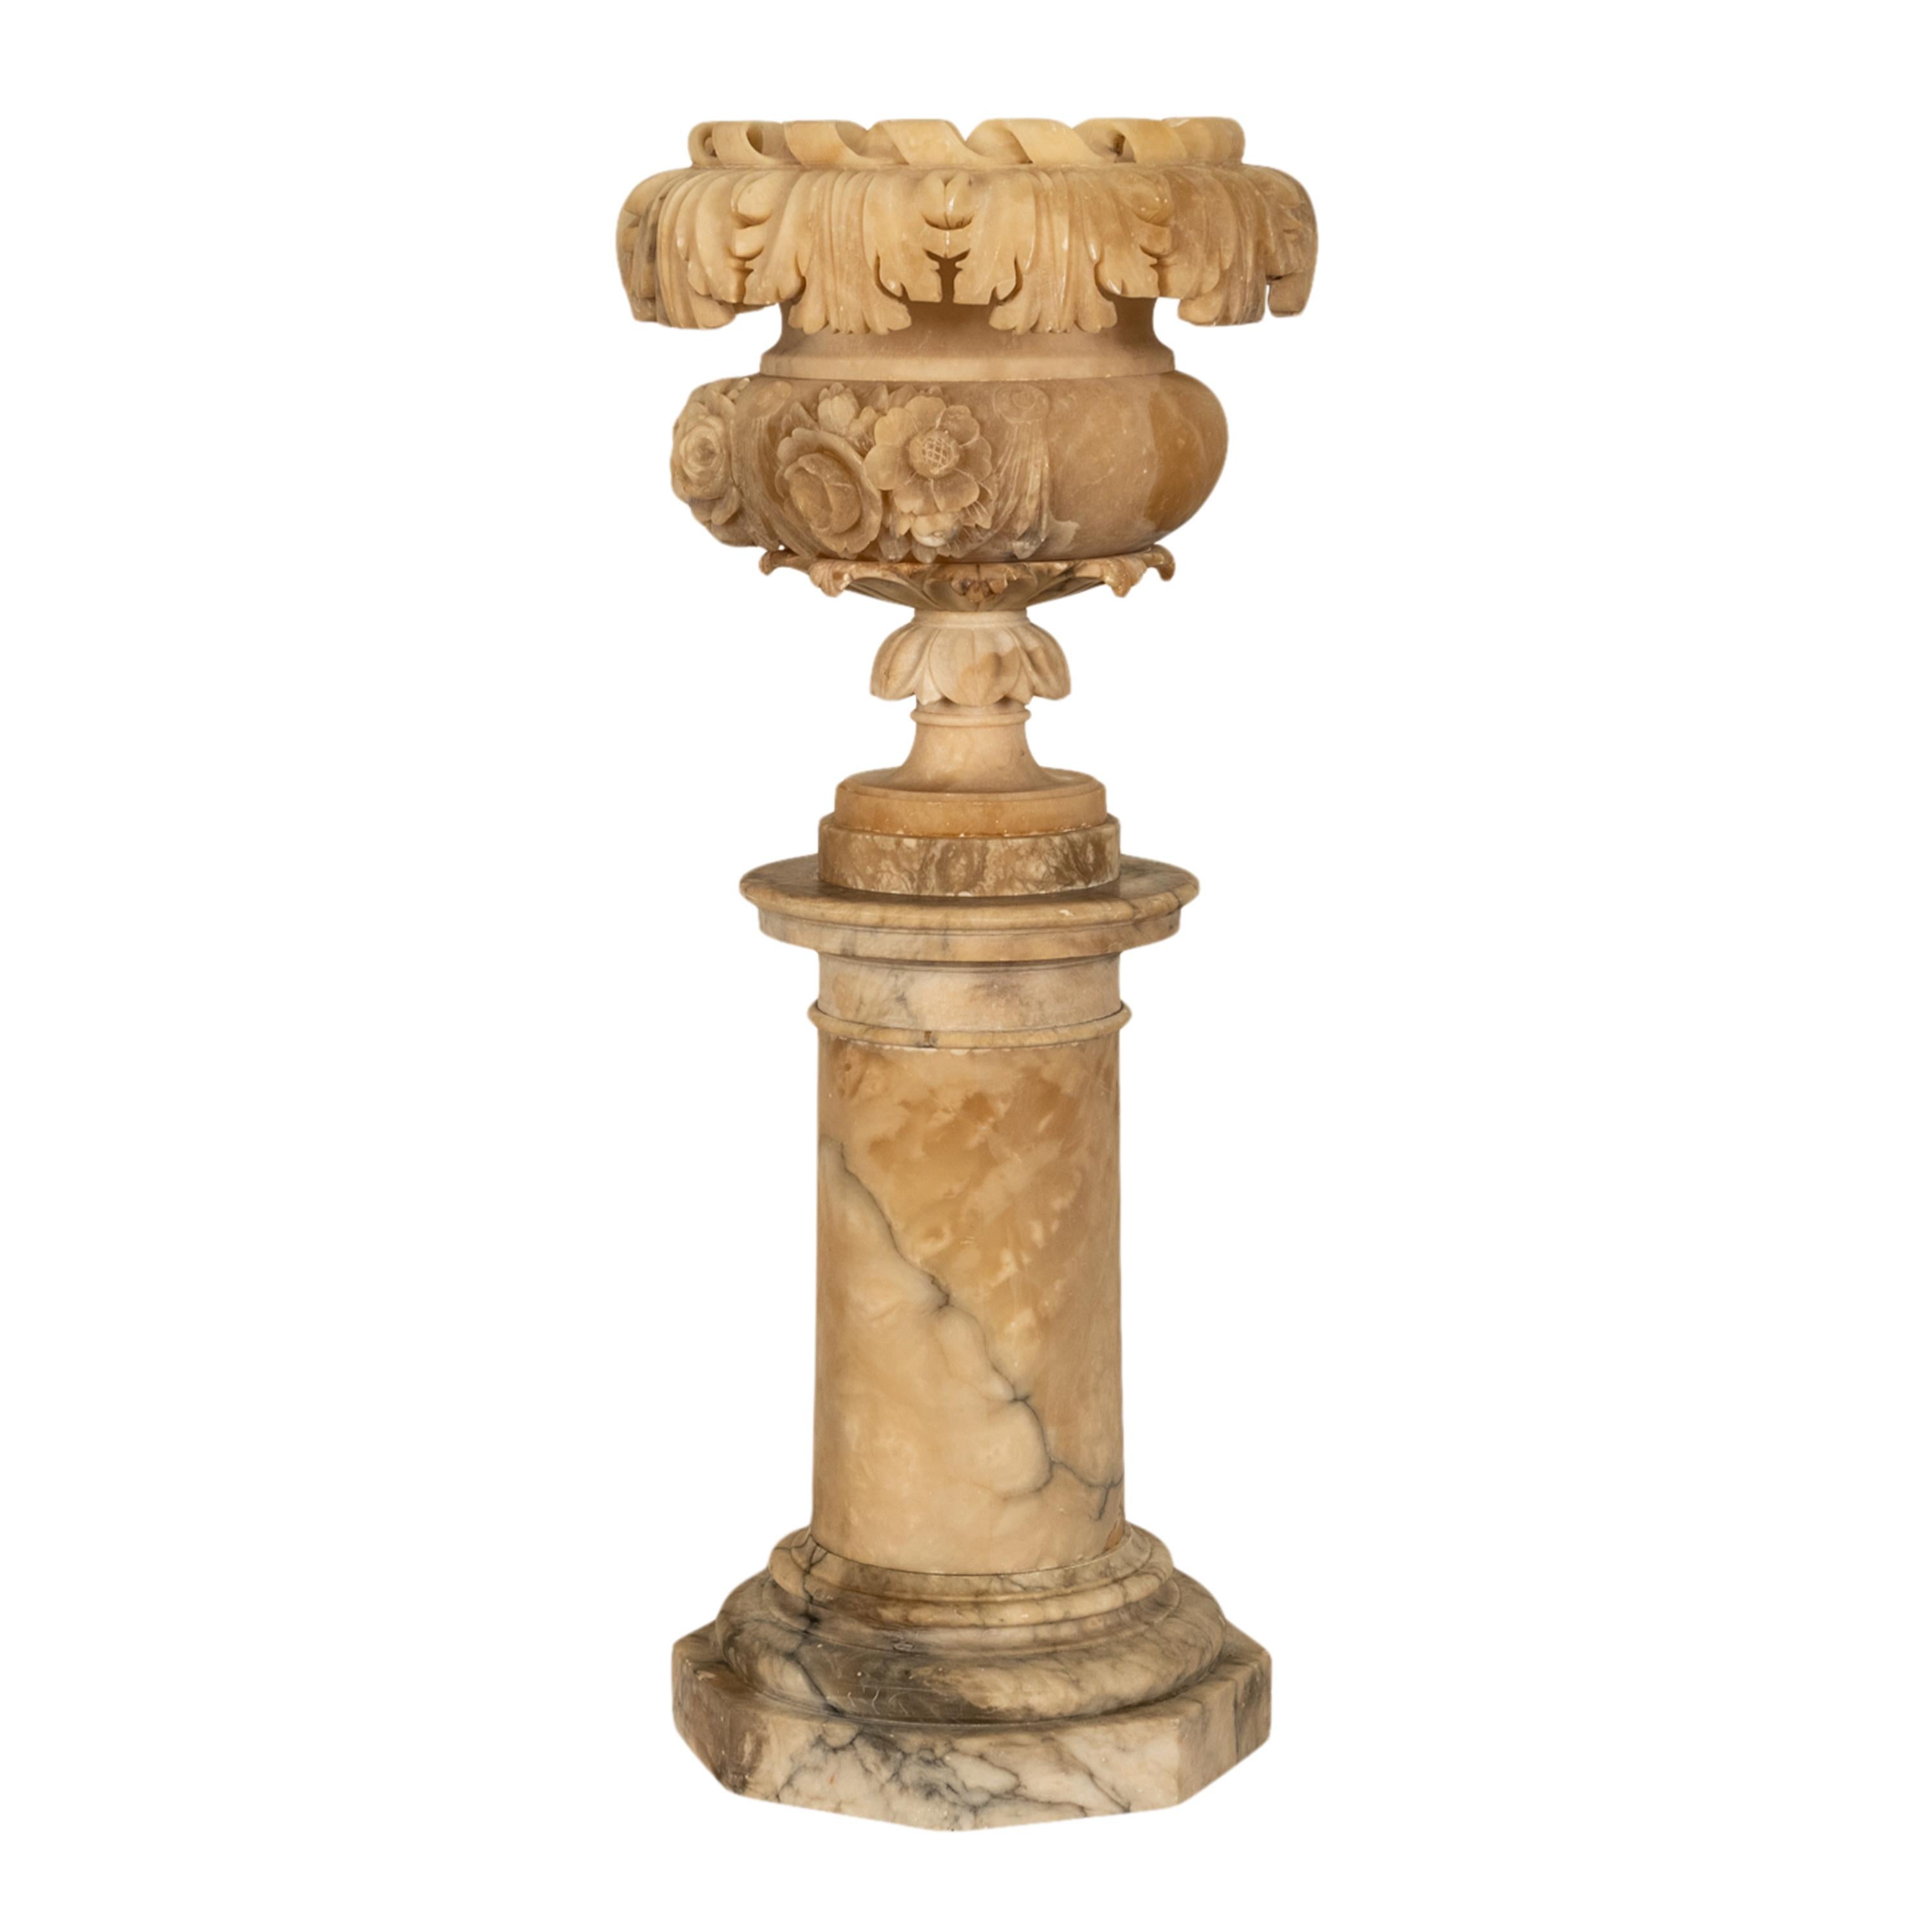 A large & substantial antique Italian Neoclassical carved alabaster urn on pedestal, circa 1850.
The urn is made of the finest variegated & veined alabaster, the campagna shaped urn with a pronounced 'rope twist' rim and a garland of carved acanthus